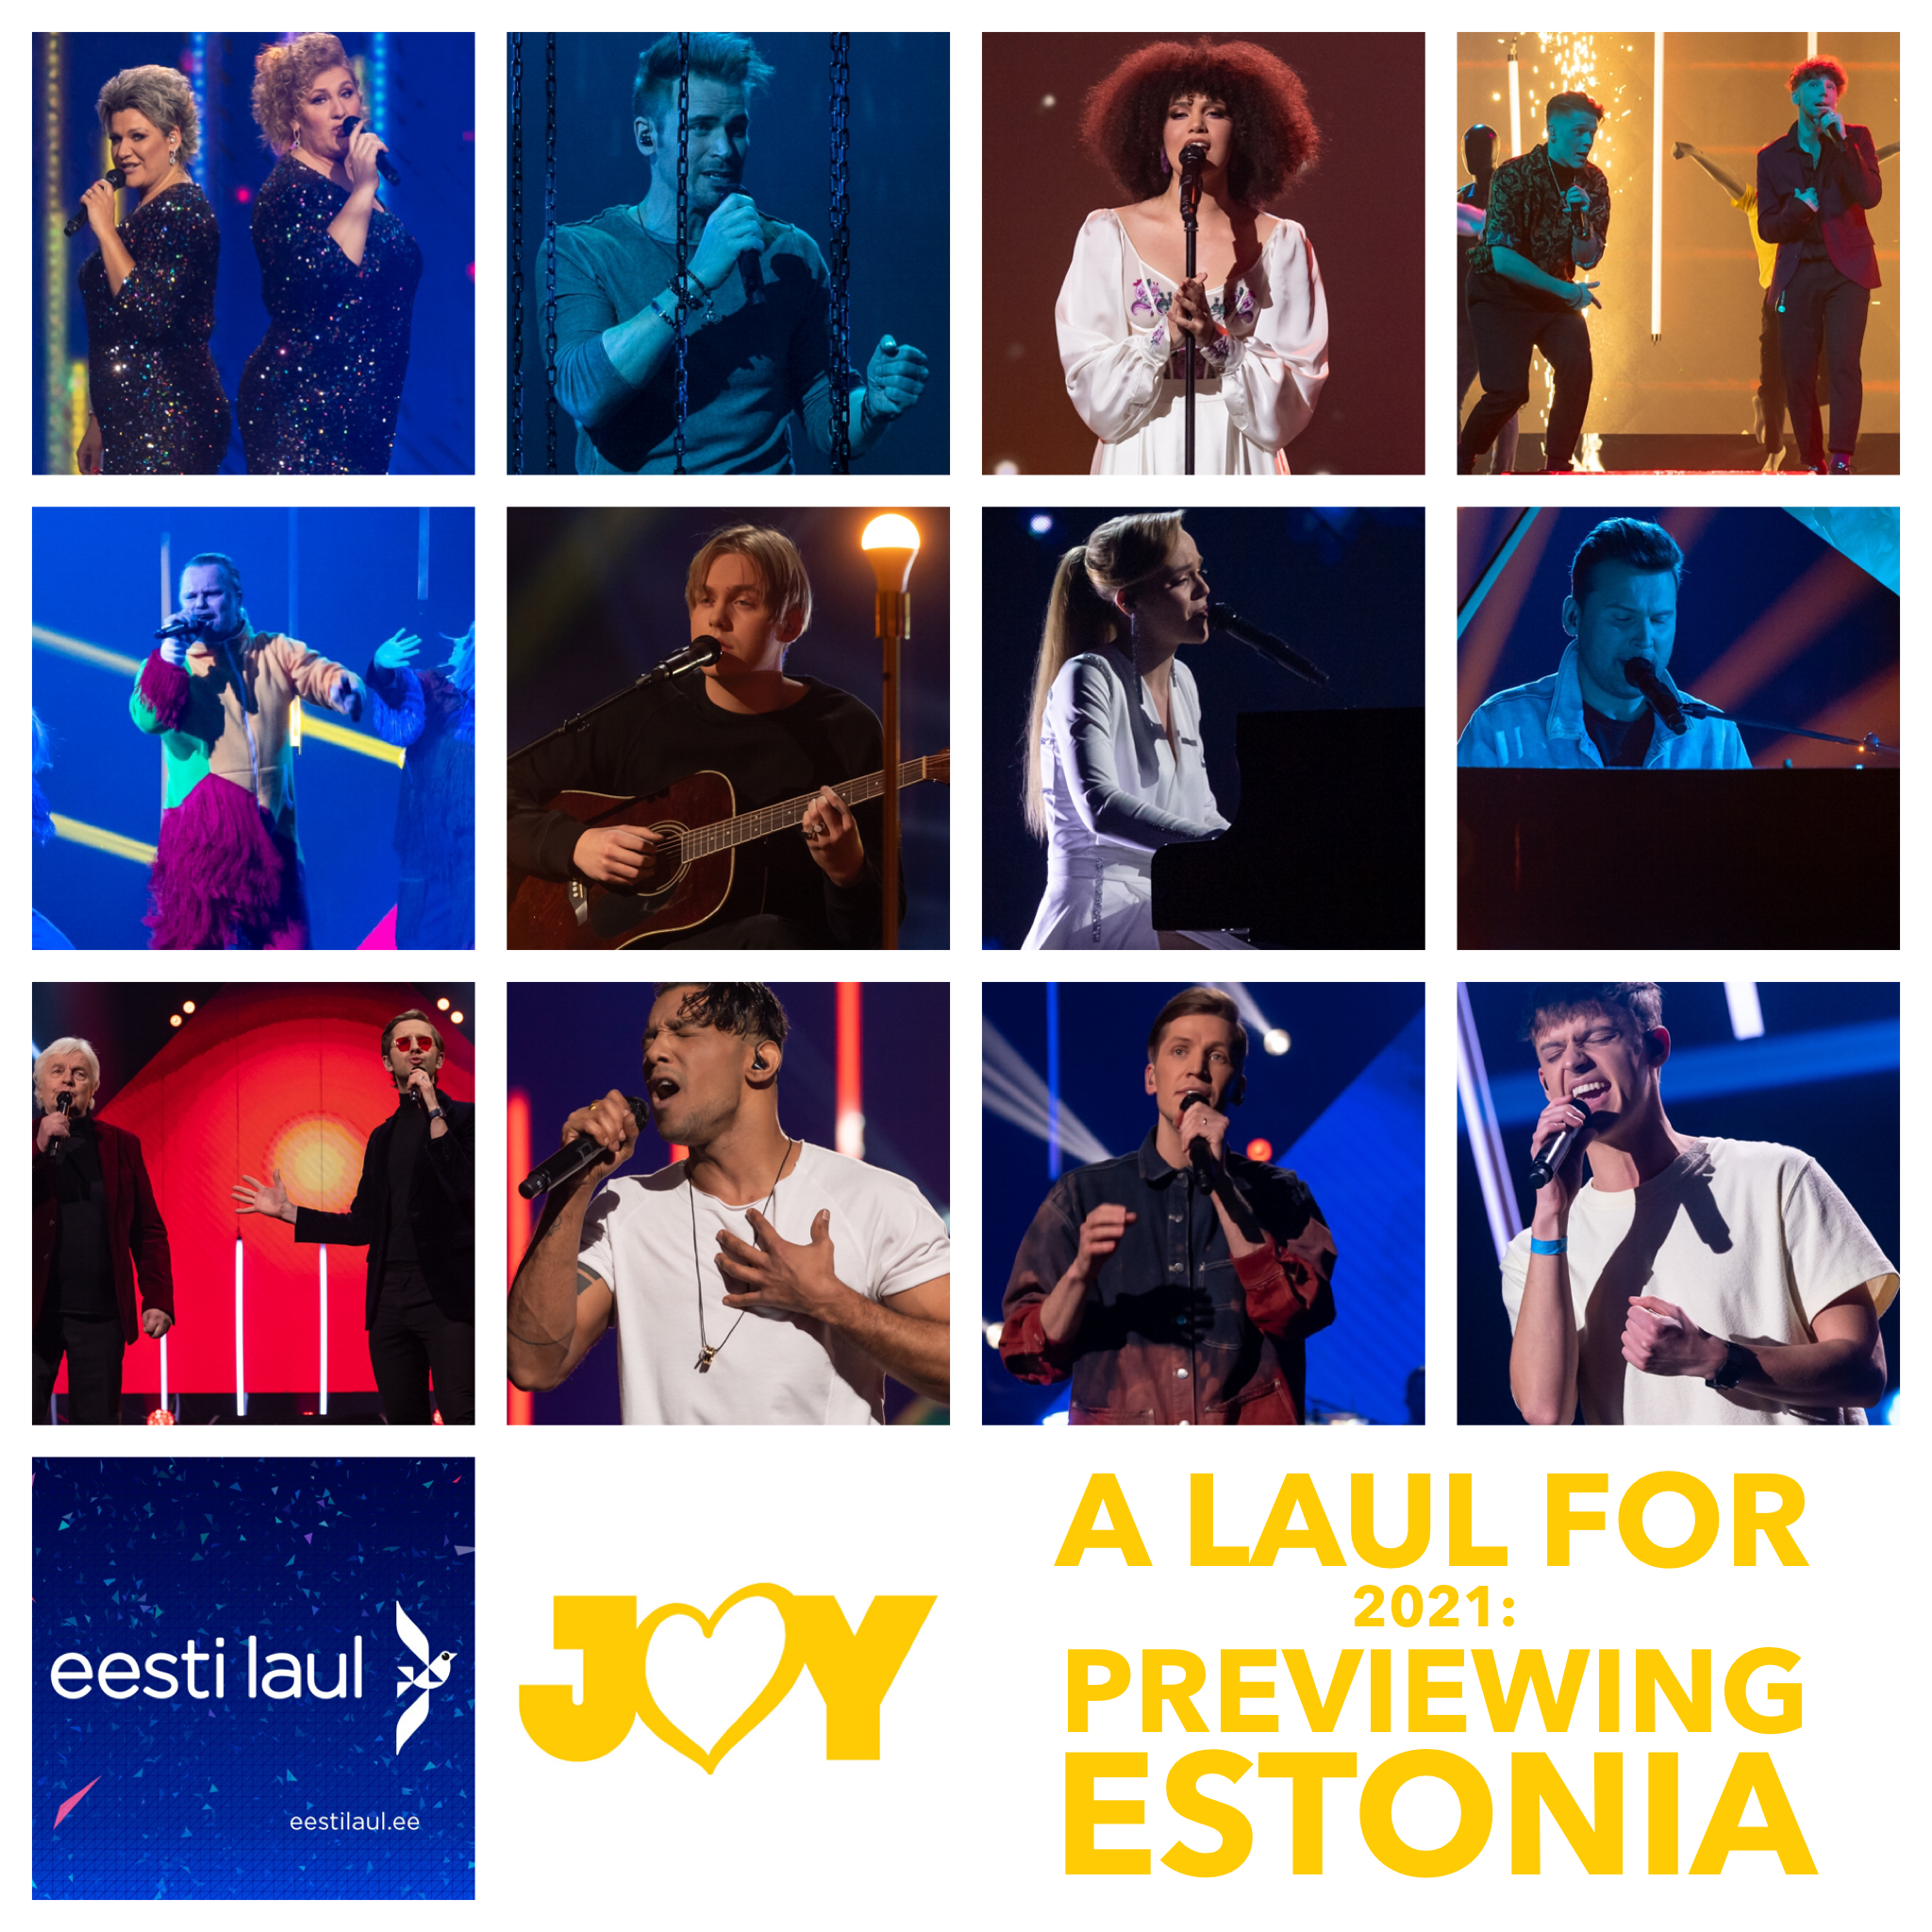 🇪🇪 A Laul for 2021: Previewing Eesti Laul